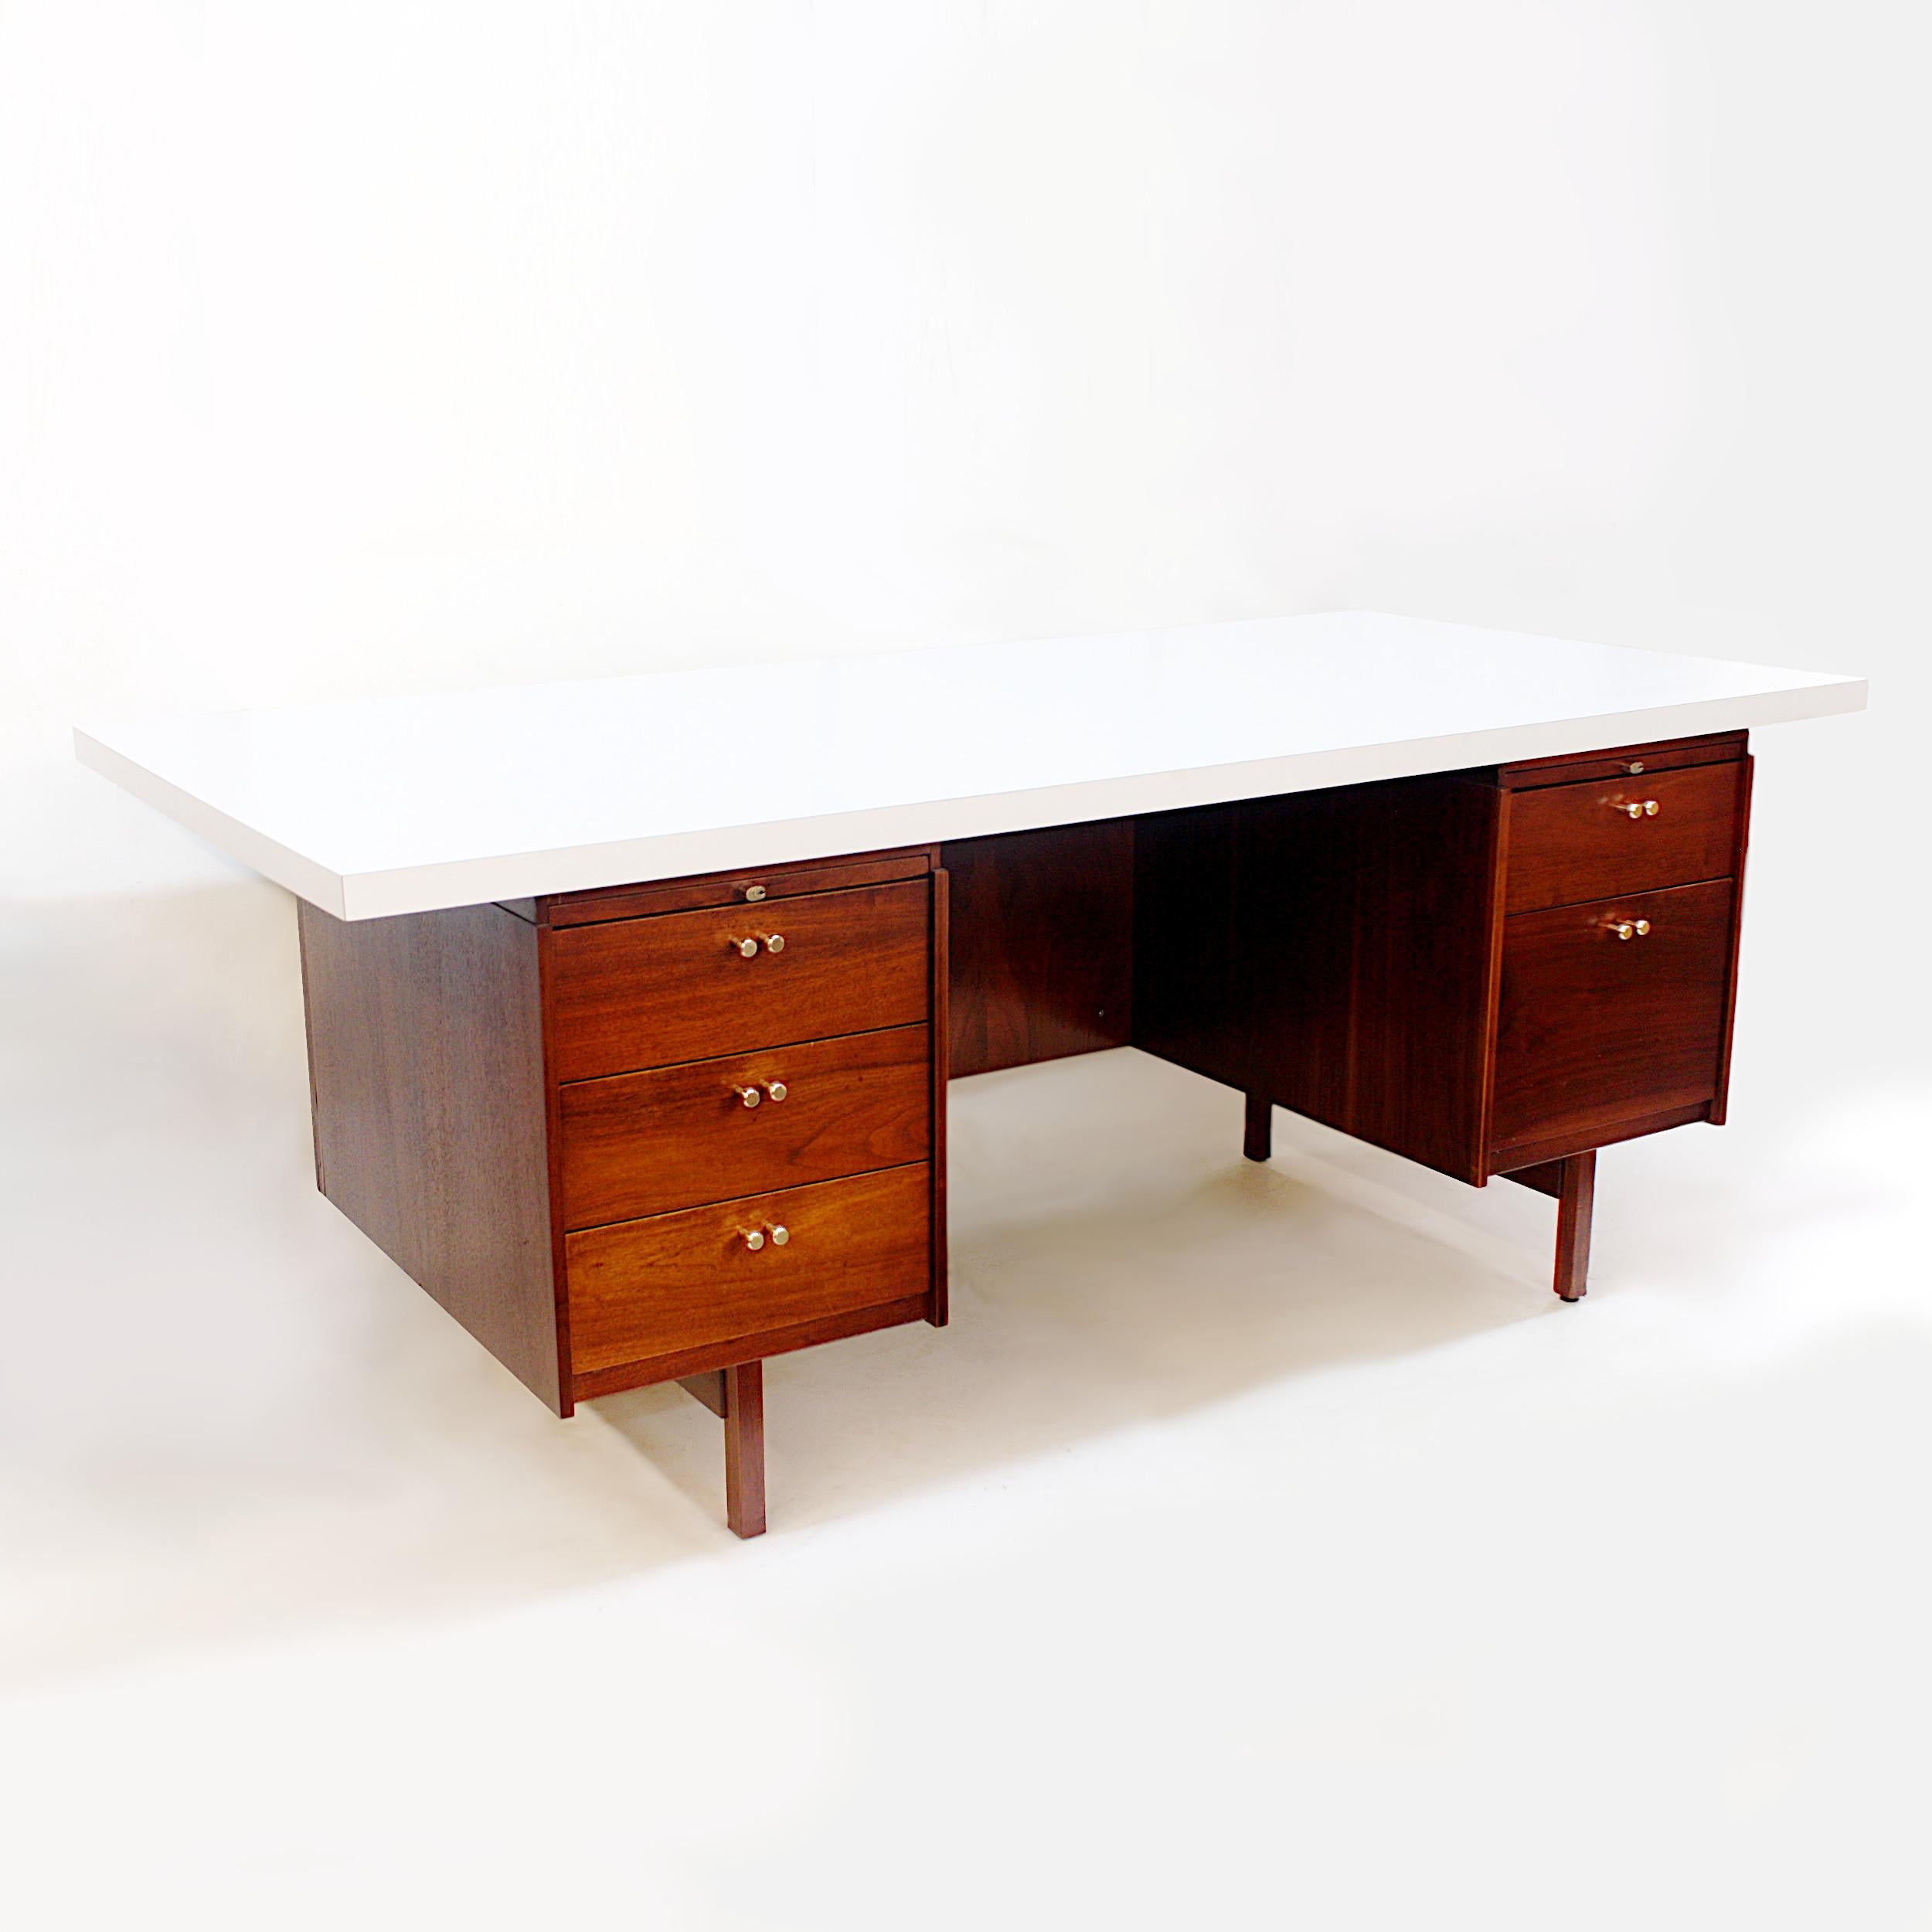 This amazing desk is part of the Template Group series of furniture designed by architect/designer Charles Deaton for the Leopold furniture Company. Deaton is best known for designing the iconic 'Sculpture House' located on Genessee Mountain in